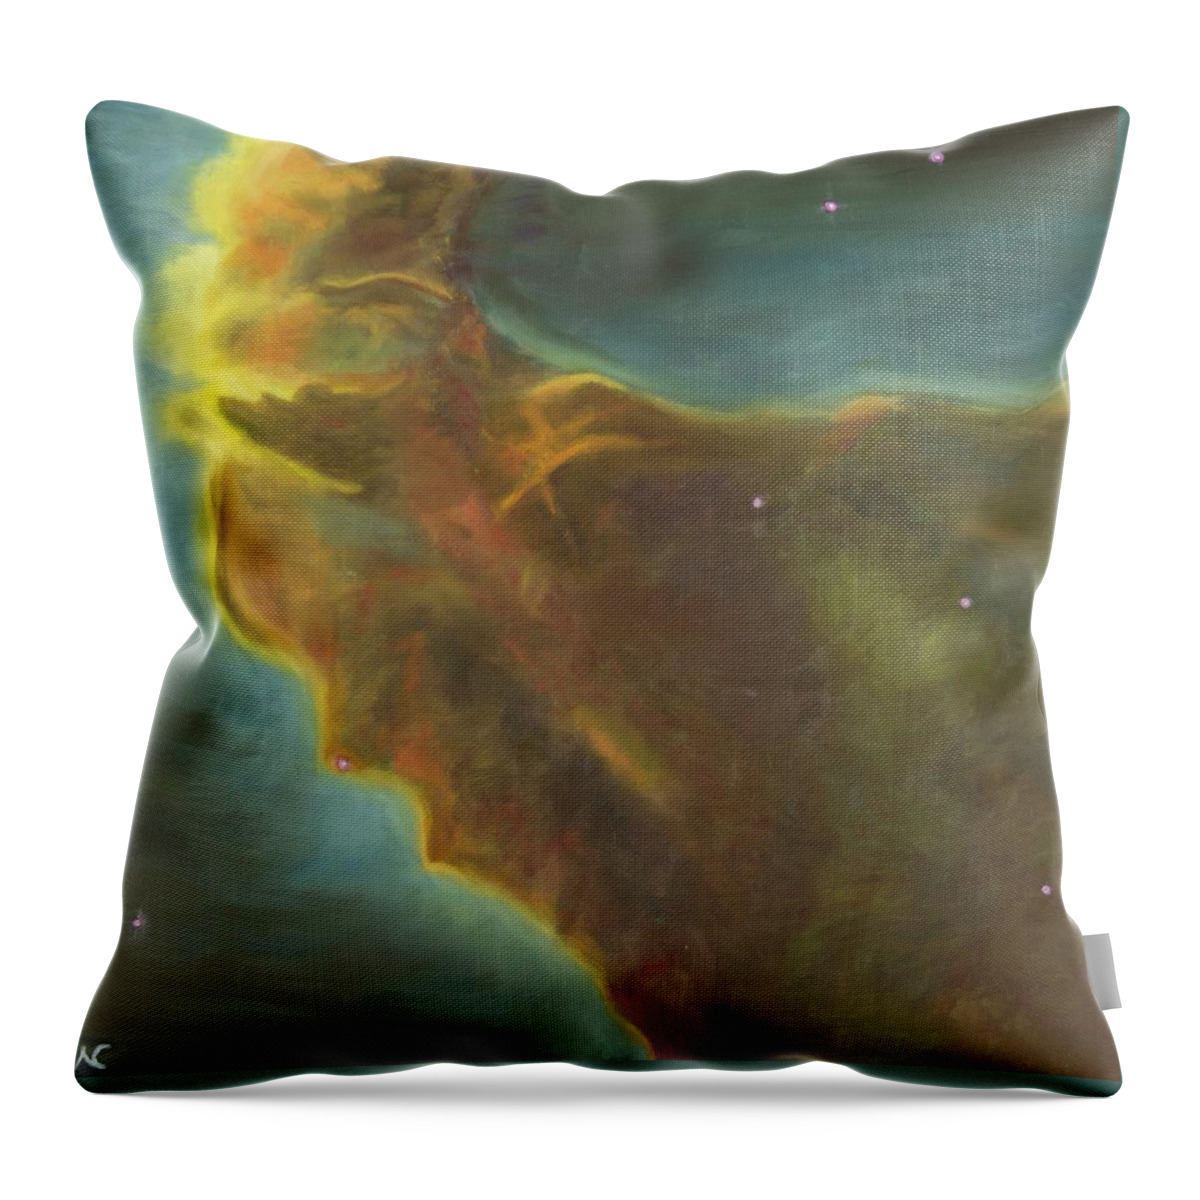 Nebula Throw Pillow featuring the painting Eagle Nebula by Neslihan Ergul Colley